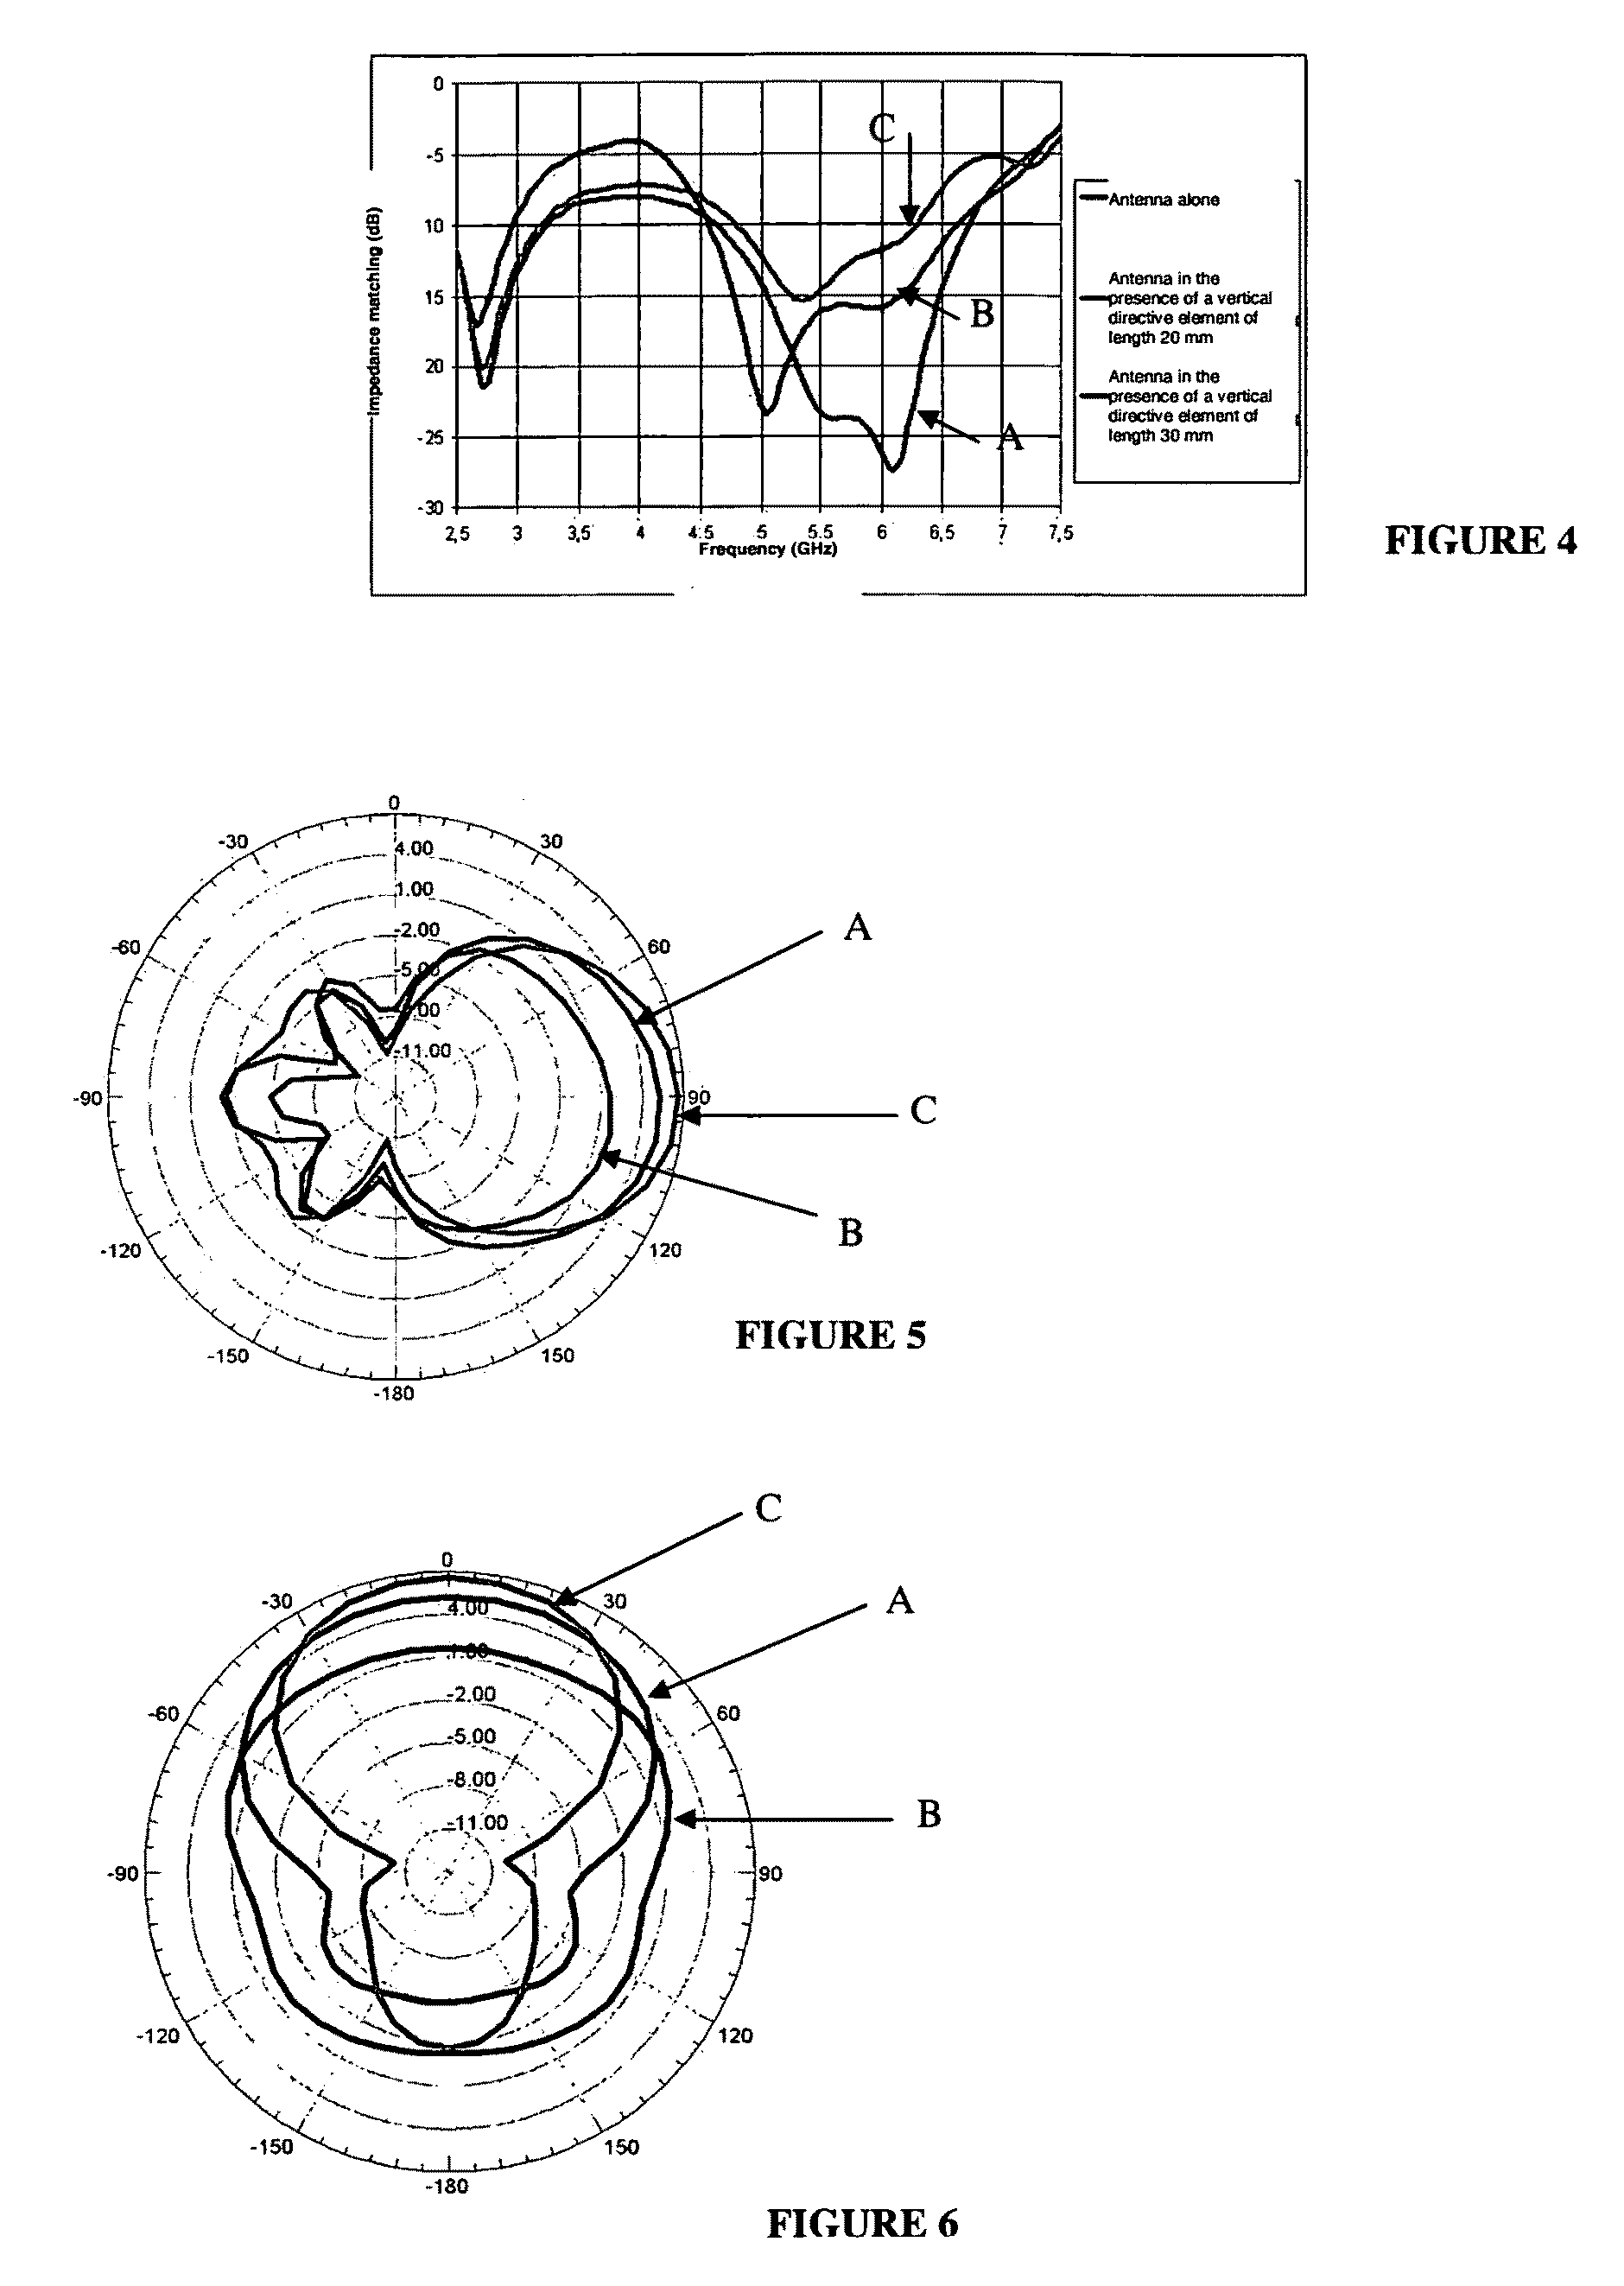 To planar antennas comprising at least one radiating element of the longitudinal radiation slot type